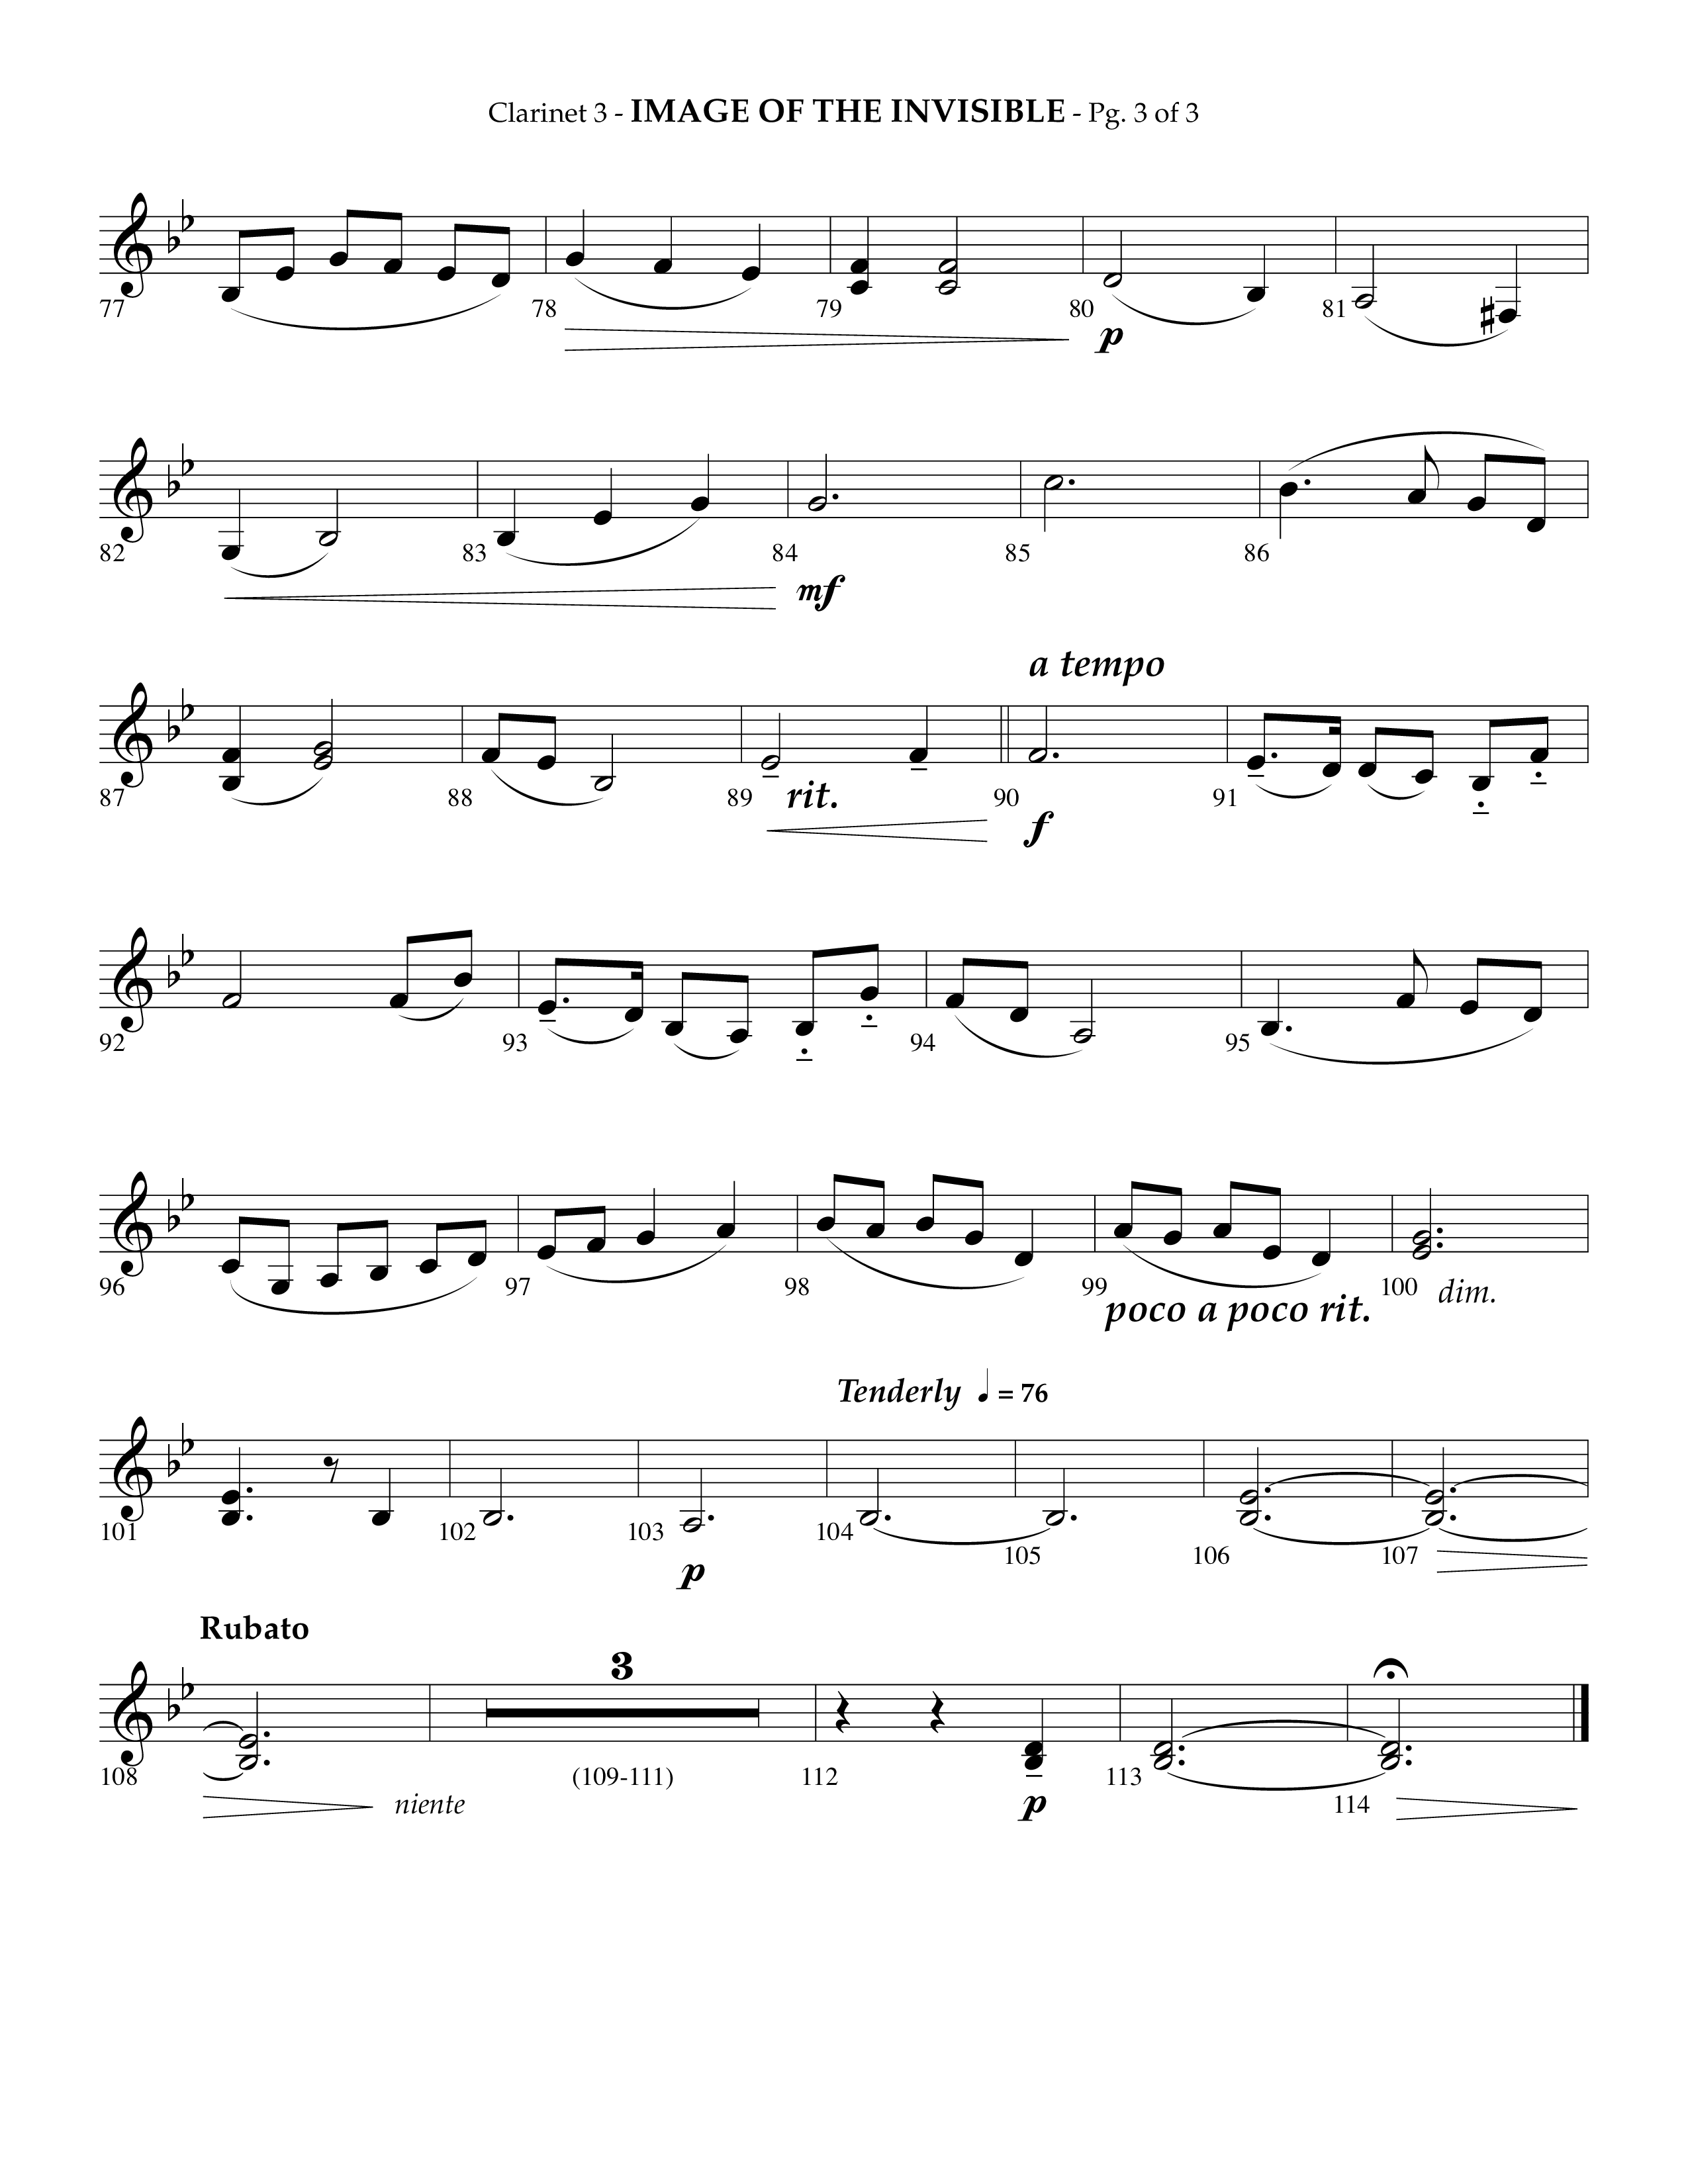 Image Of The Invisible (Choral Anthem SATB) Clarinet 3 (Lifeway Choral / Arr. Phillip Keveren)